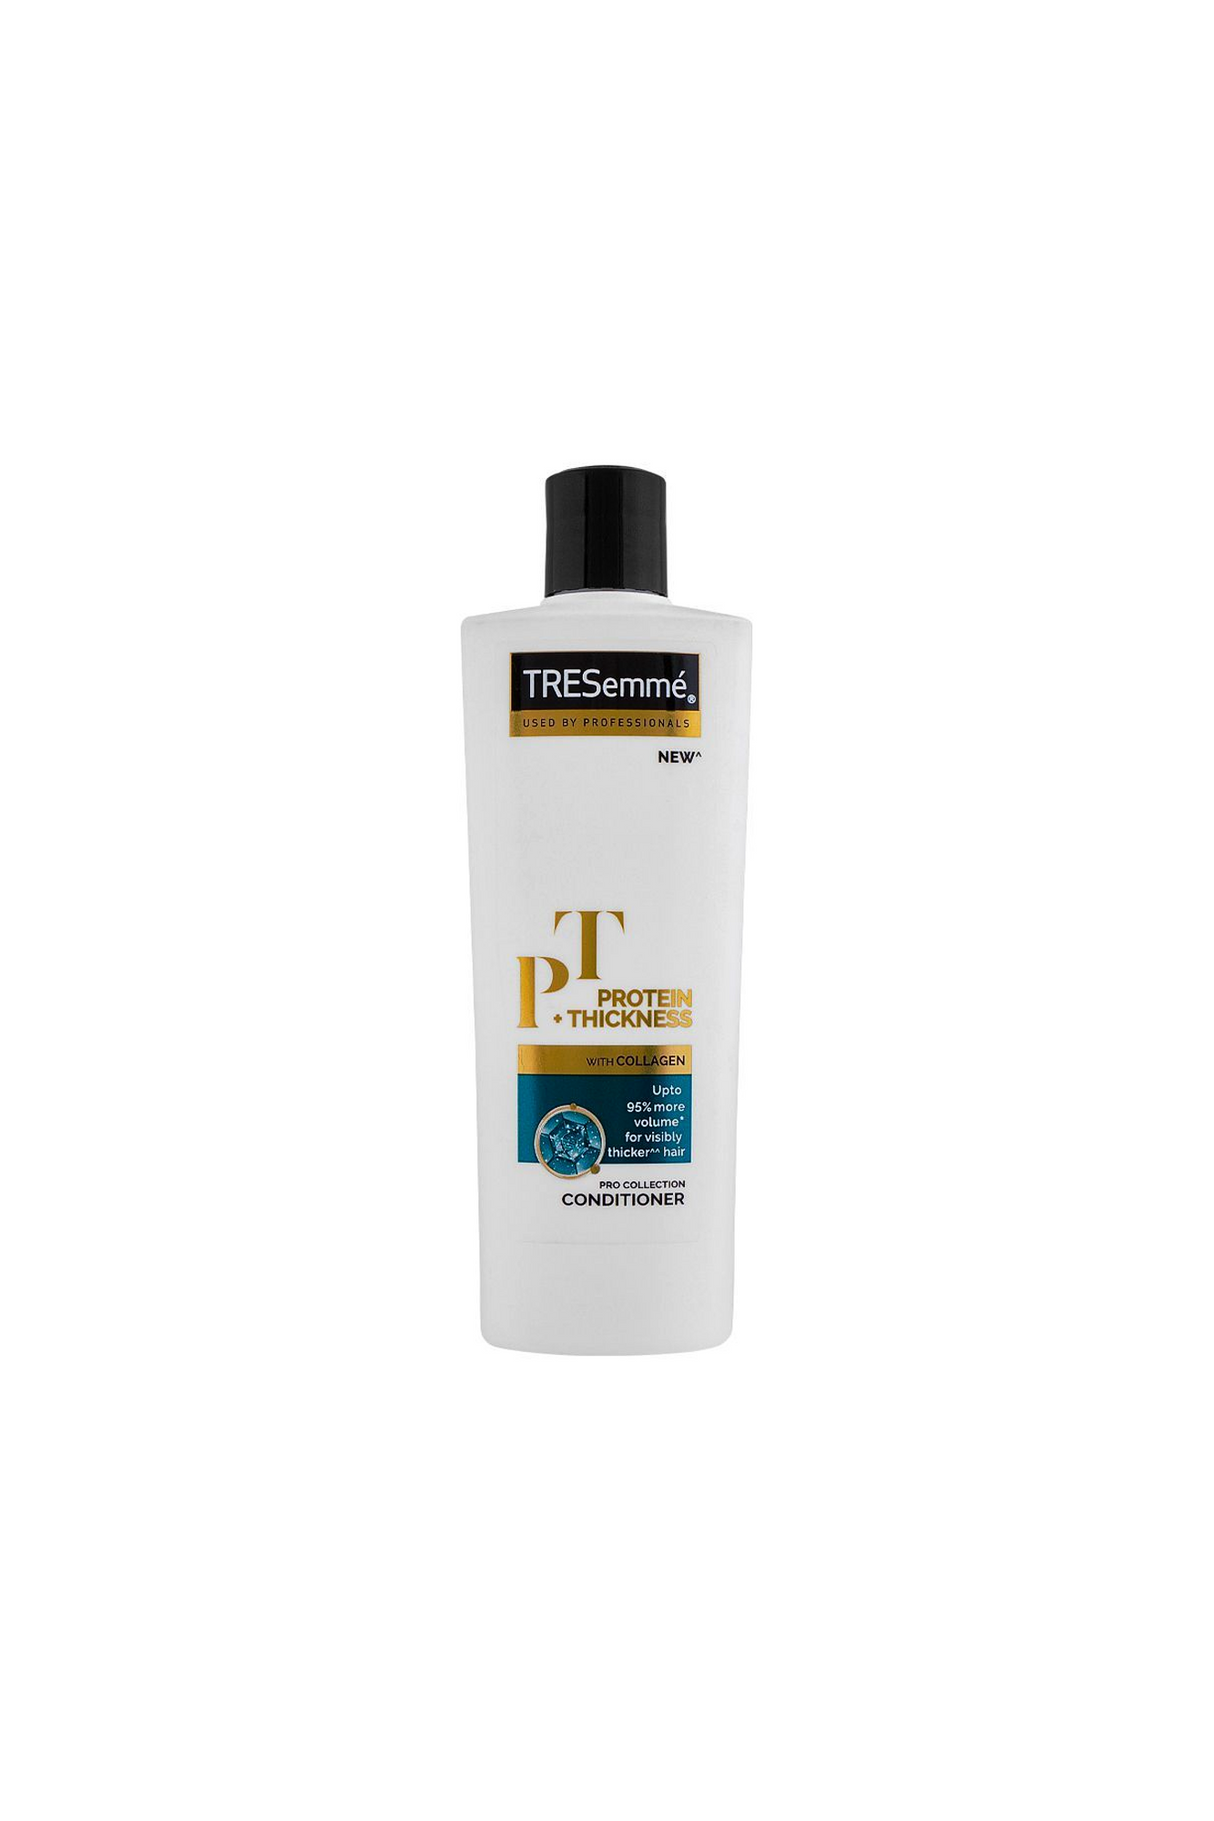 tresemme conditioner protein thickness 360ml